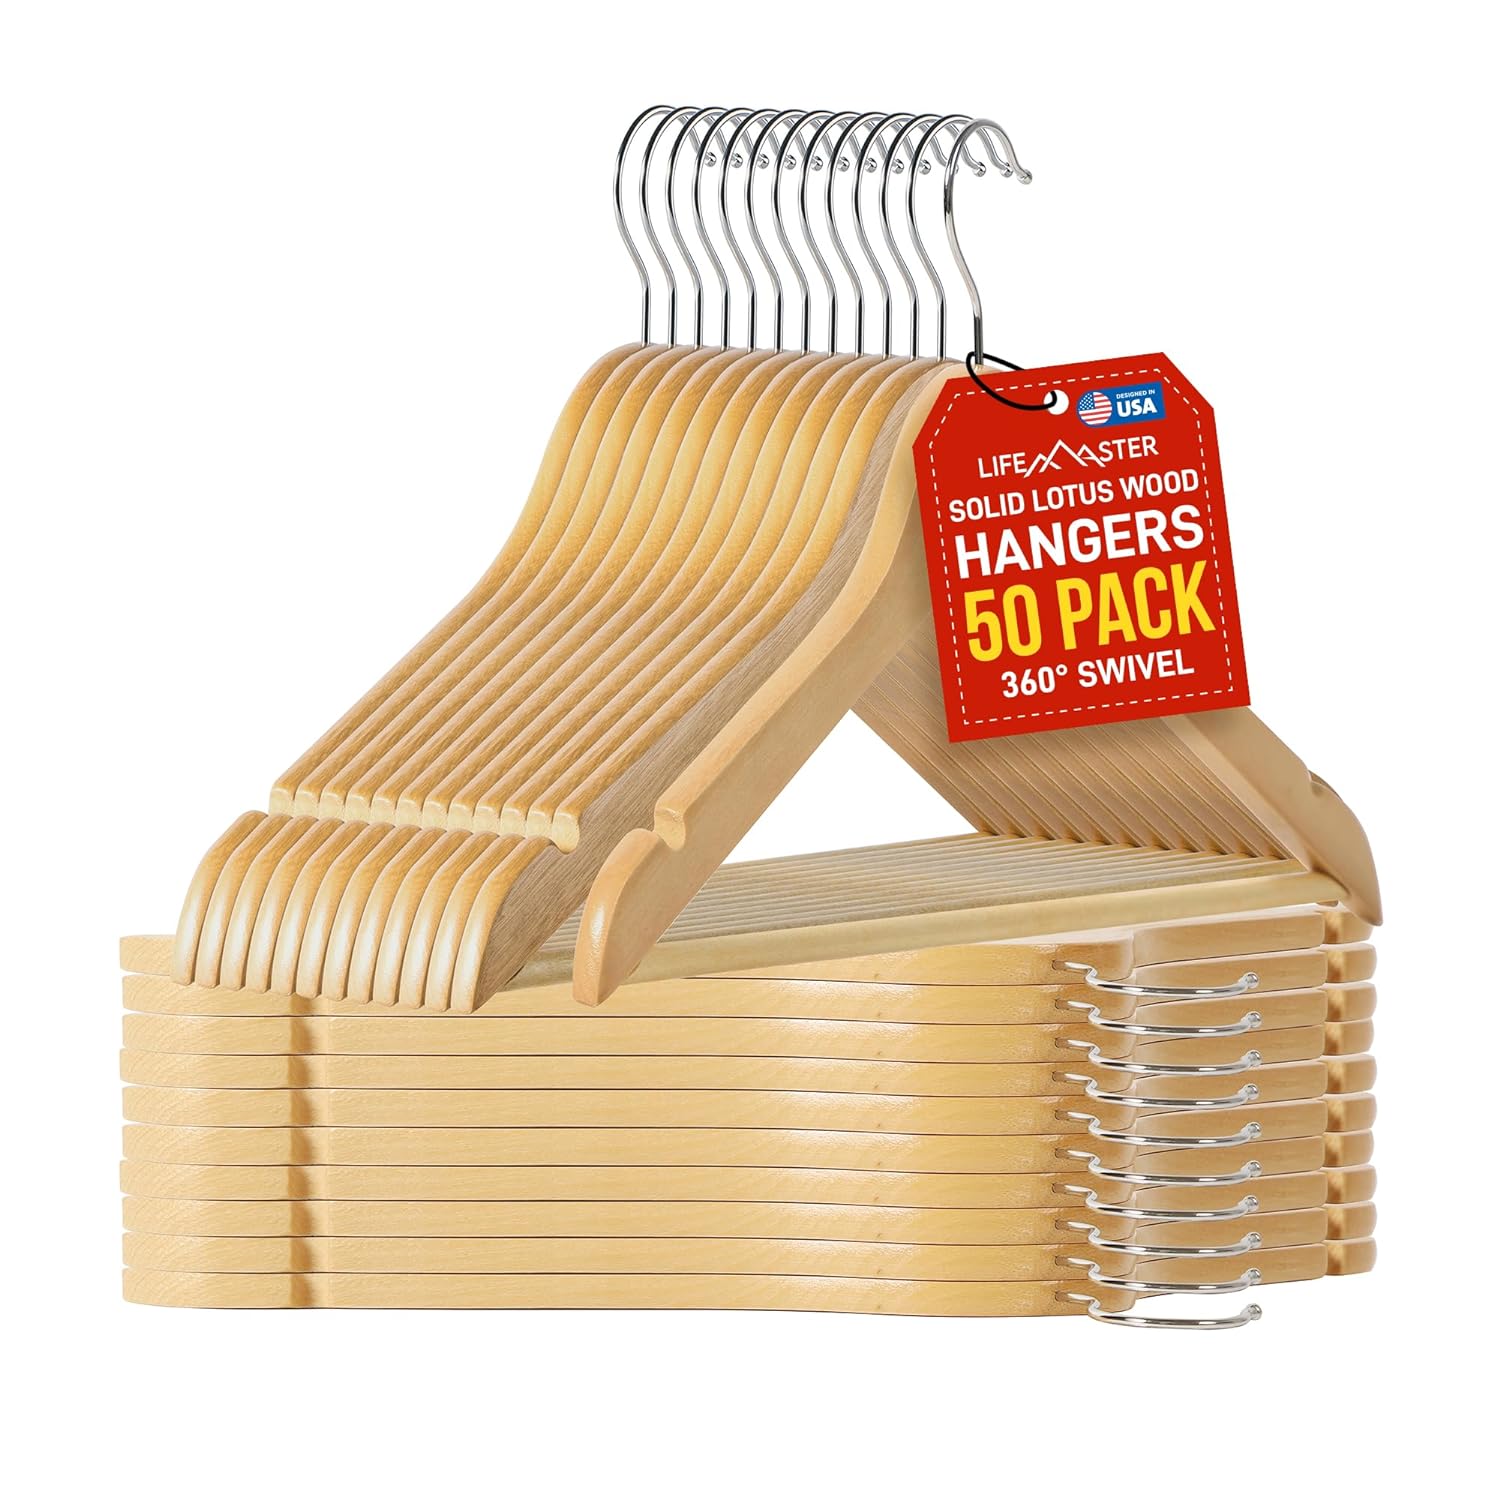 https://bigbigmart.com/wp-content/uploads/2023/12/Lifemaster-Tough-Long-Lasting-Solid-Maple-Wooden-Clothes-Hangers-Pack-of-50-Natural-Wood-Hangers-with-Rotating-Swivel-Hooks-and-Built-in-Notches-to-Organize-Jackets-Shirts-and-Pants.jpg